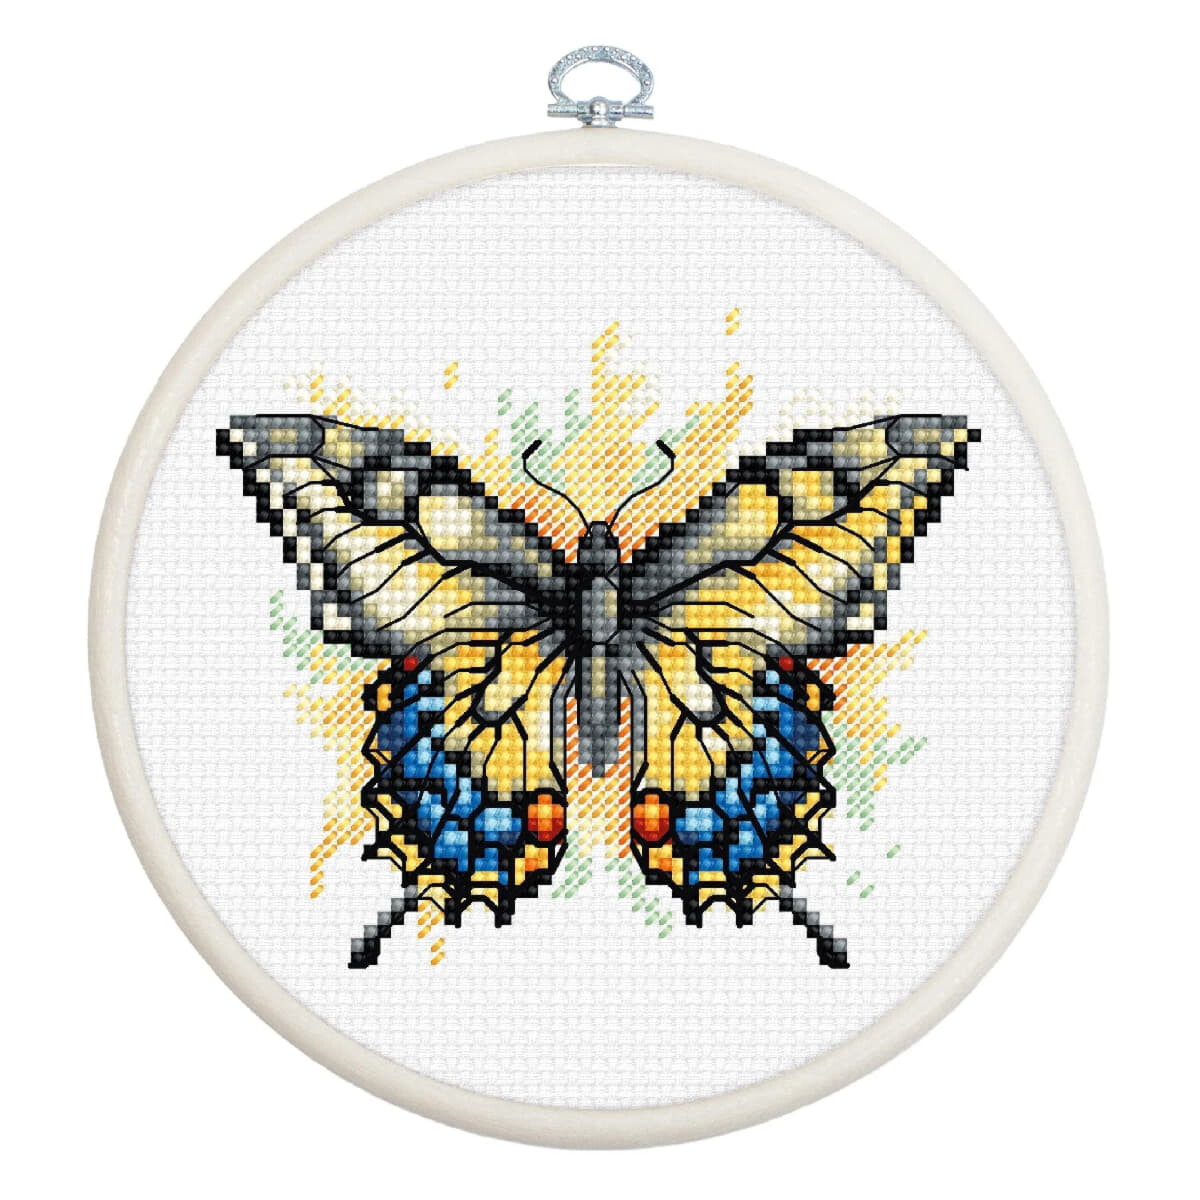 A cross stitch project from a Luca-s embroidery kit,...